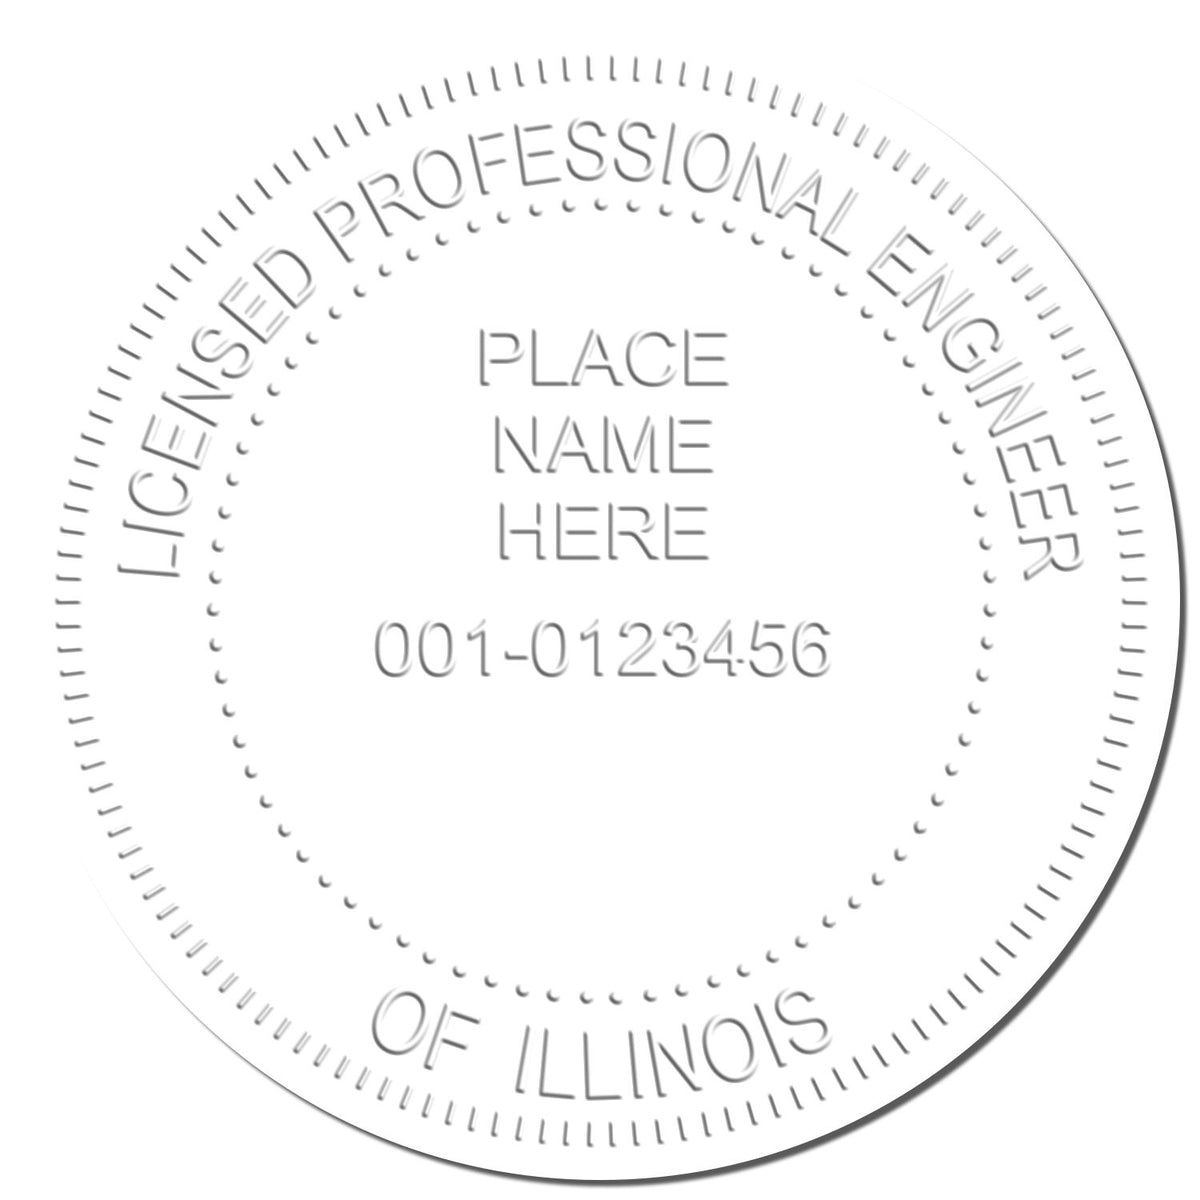 This paper is stamped with a sample imprint of the State of Illinois Extended Long Reach Engineer Seal, signifying its quality and reliability.